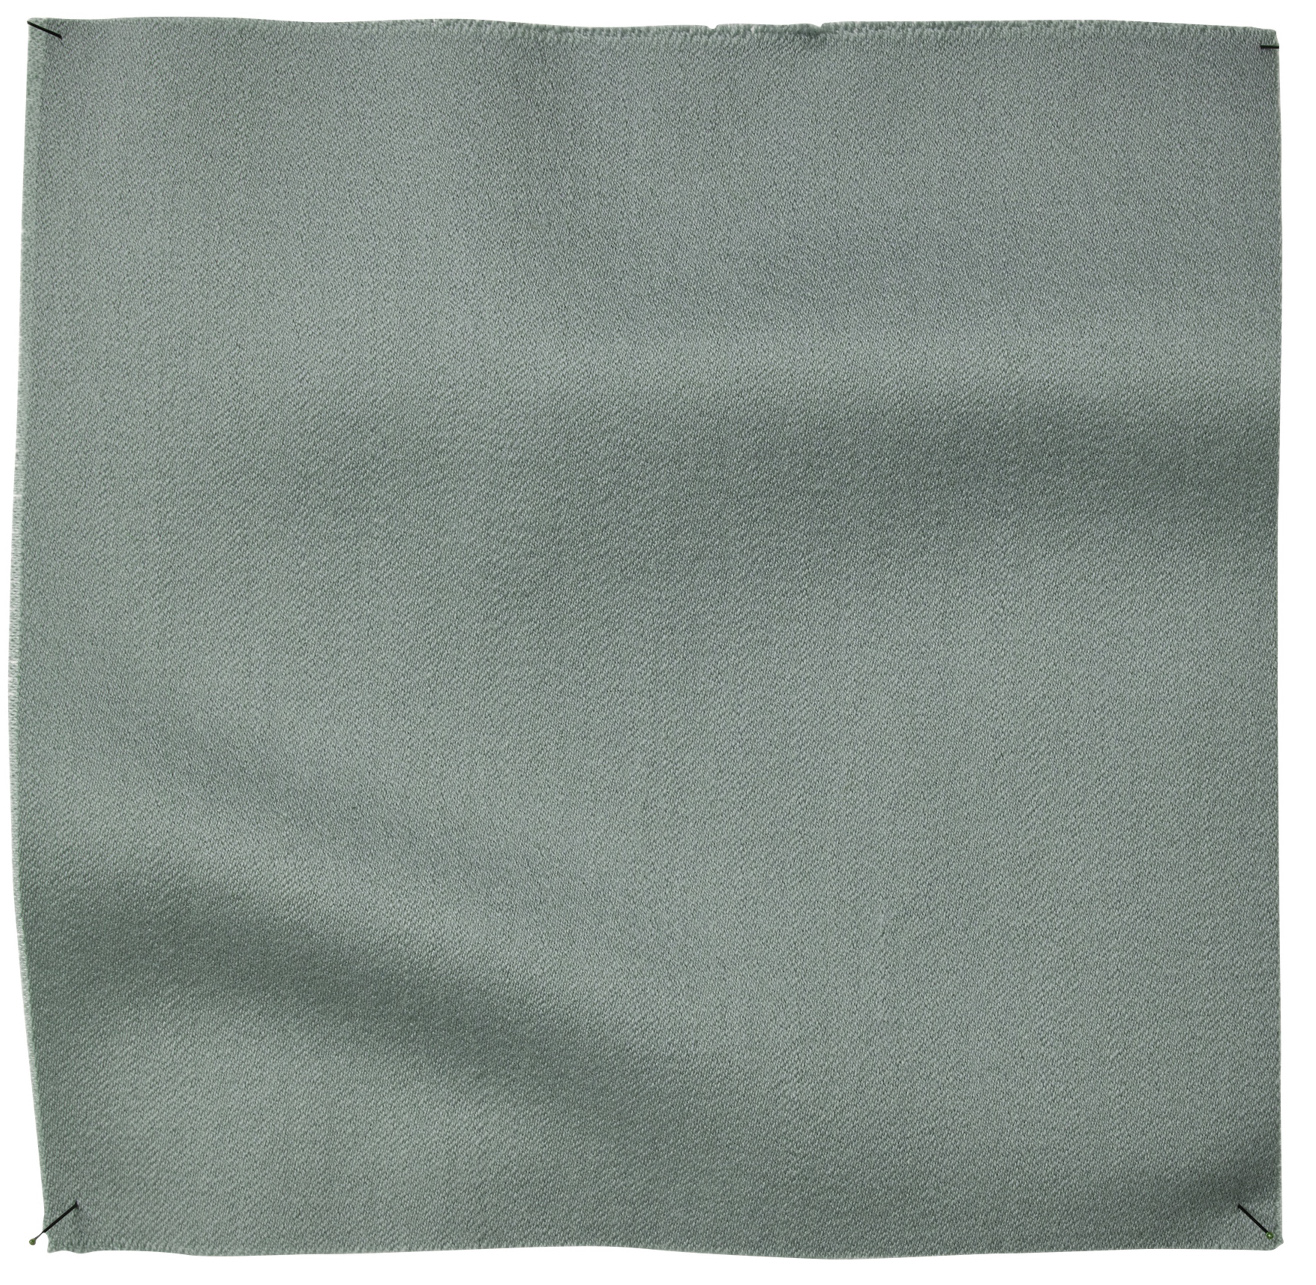 Lucido Fabric in No. 18